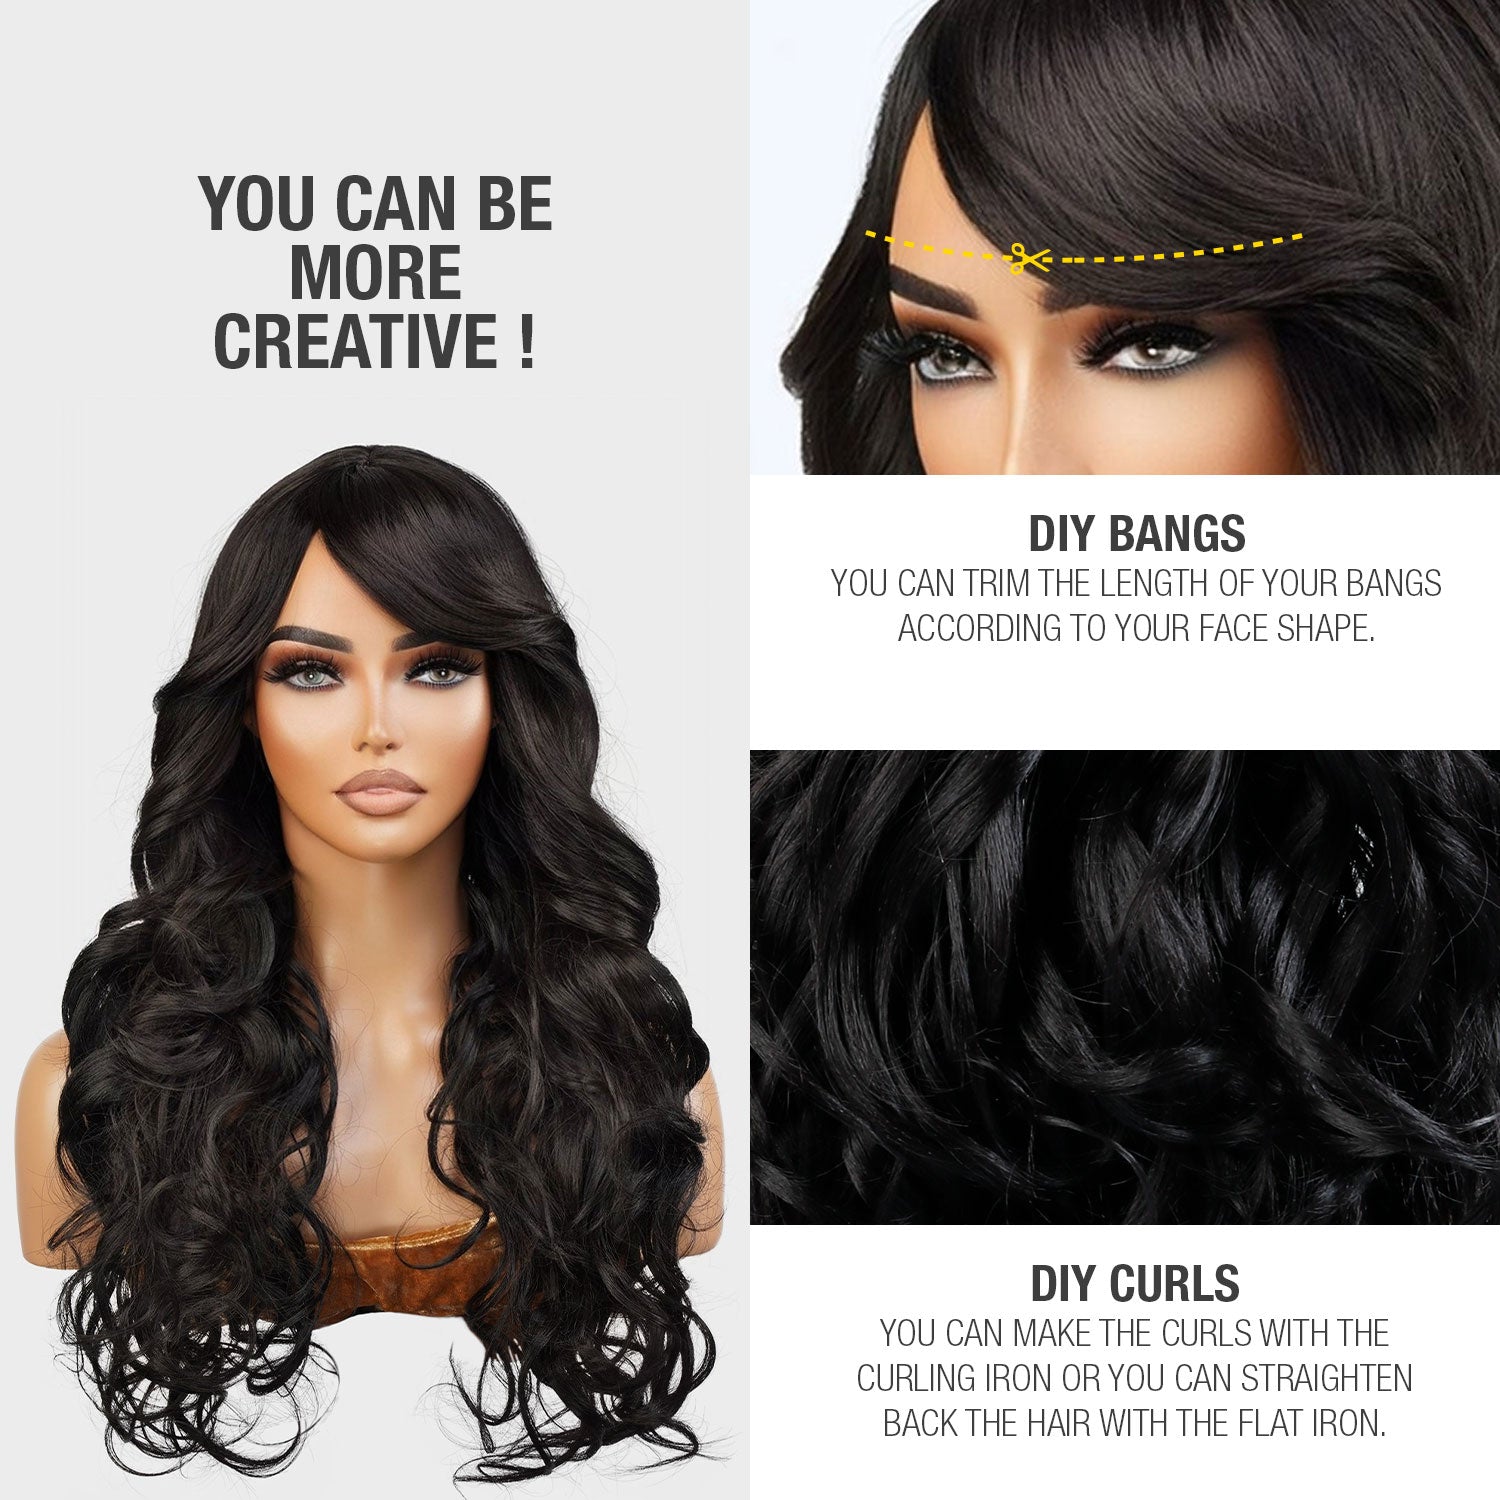 Studio Cut By Pros Sexy Wig Collection SEXY10